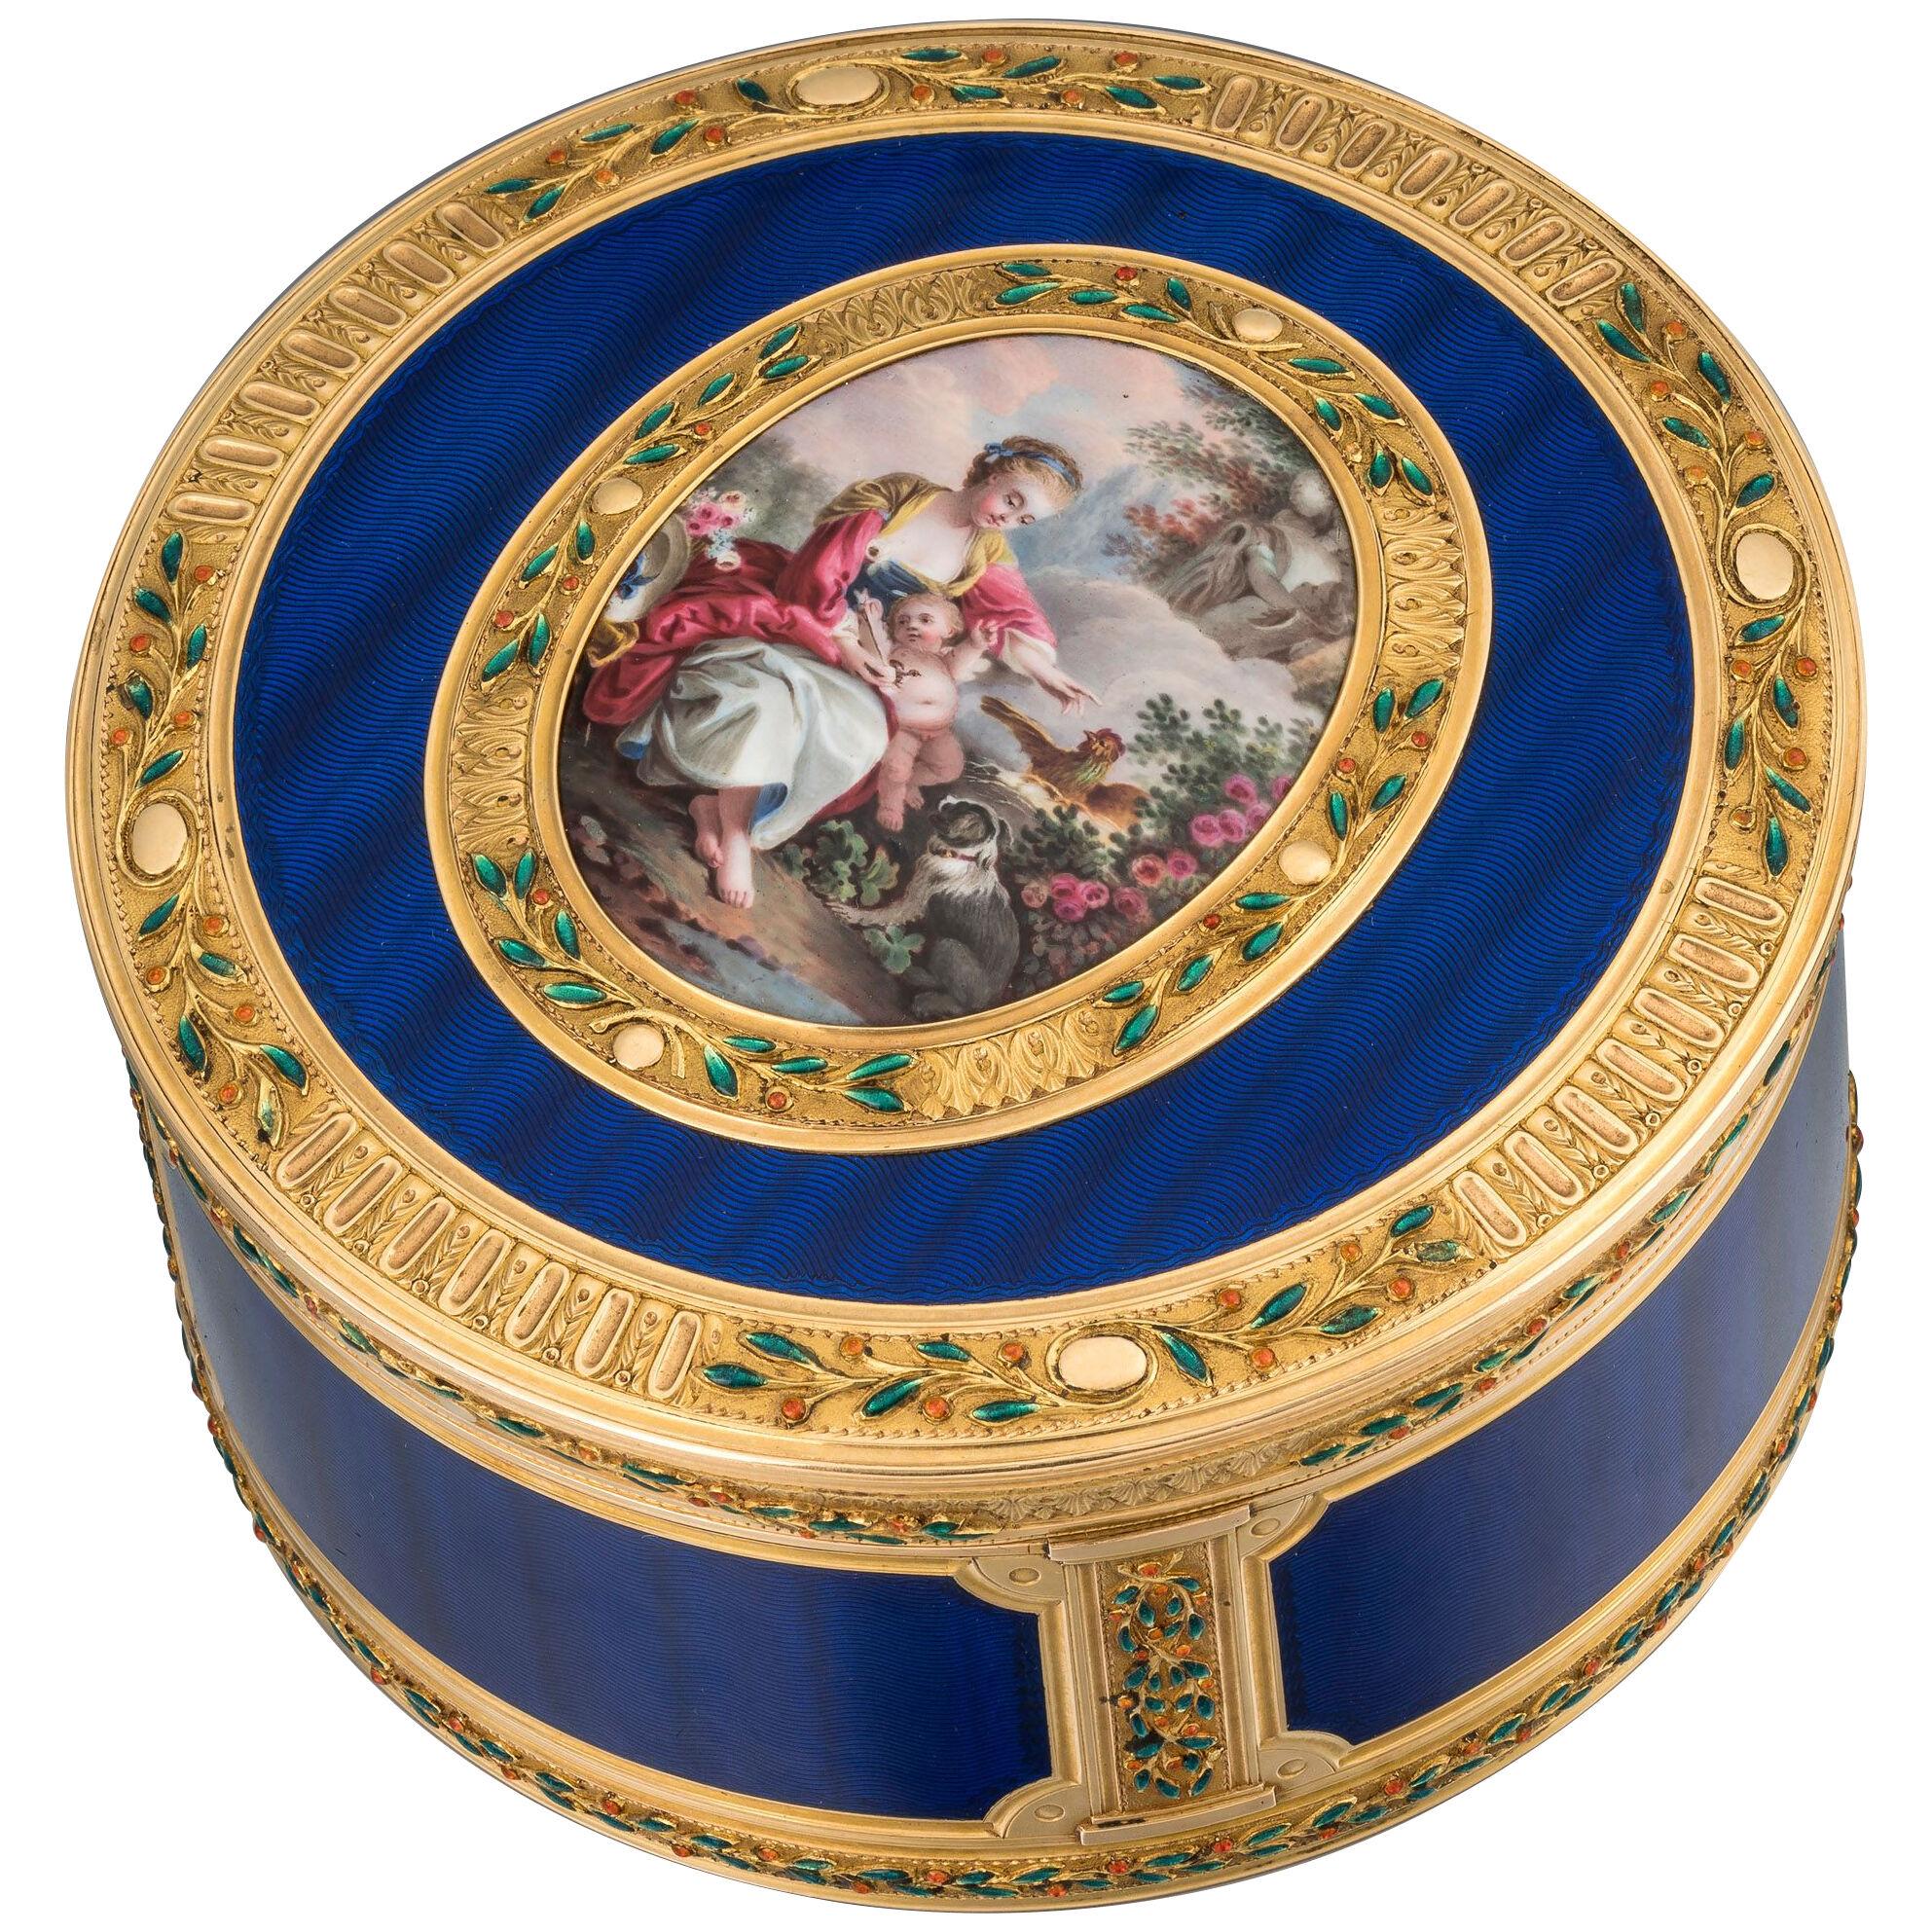 A French Gold and Enamel Box